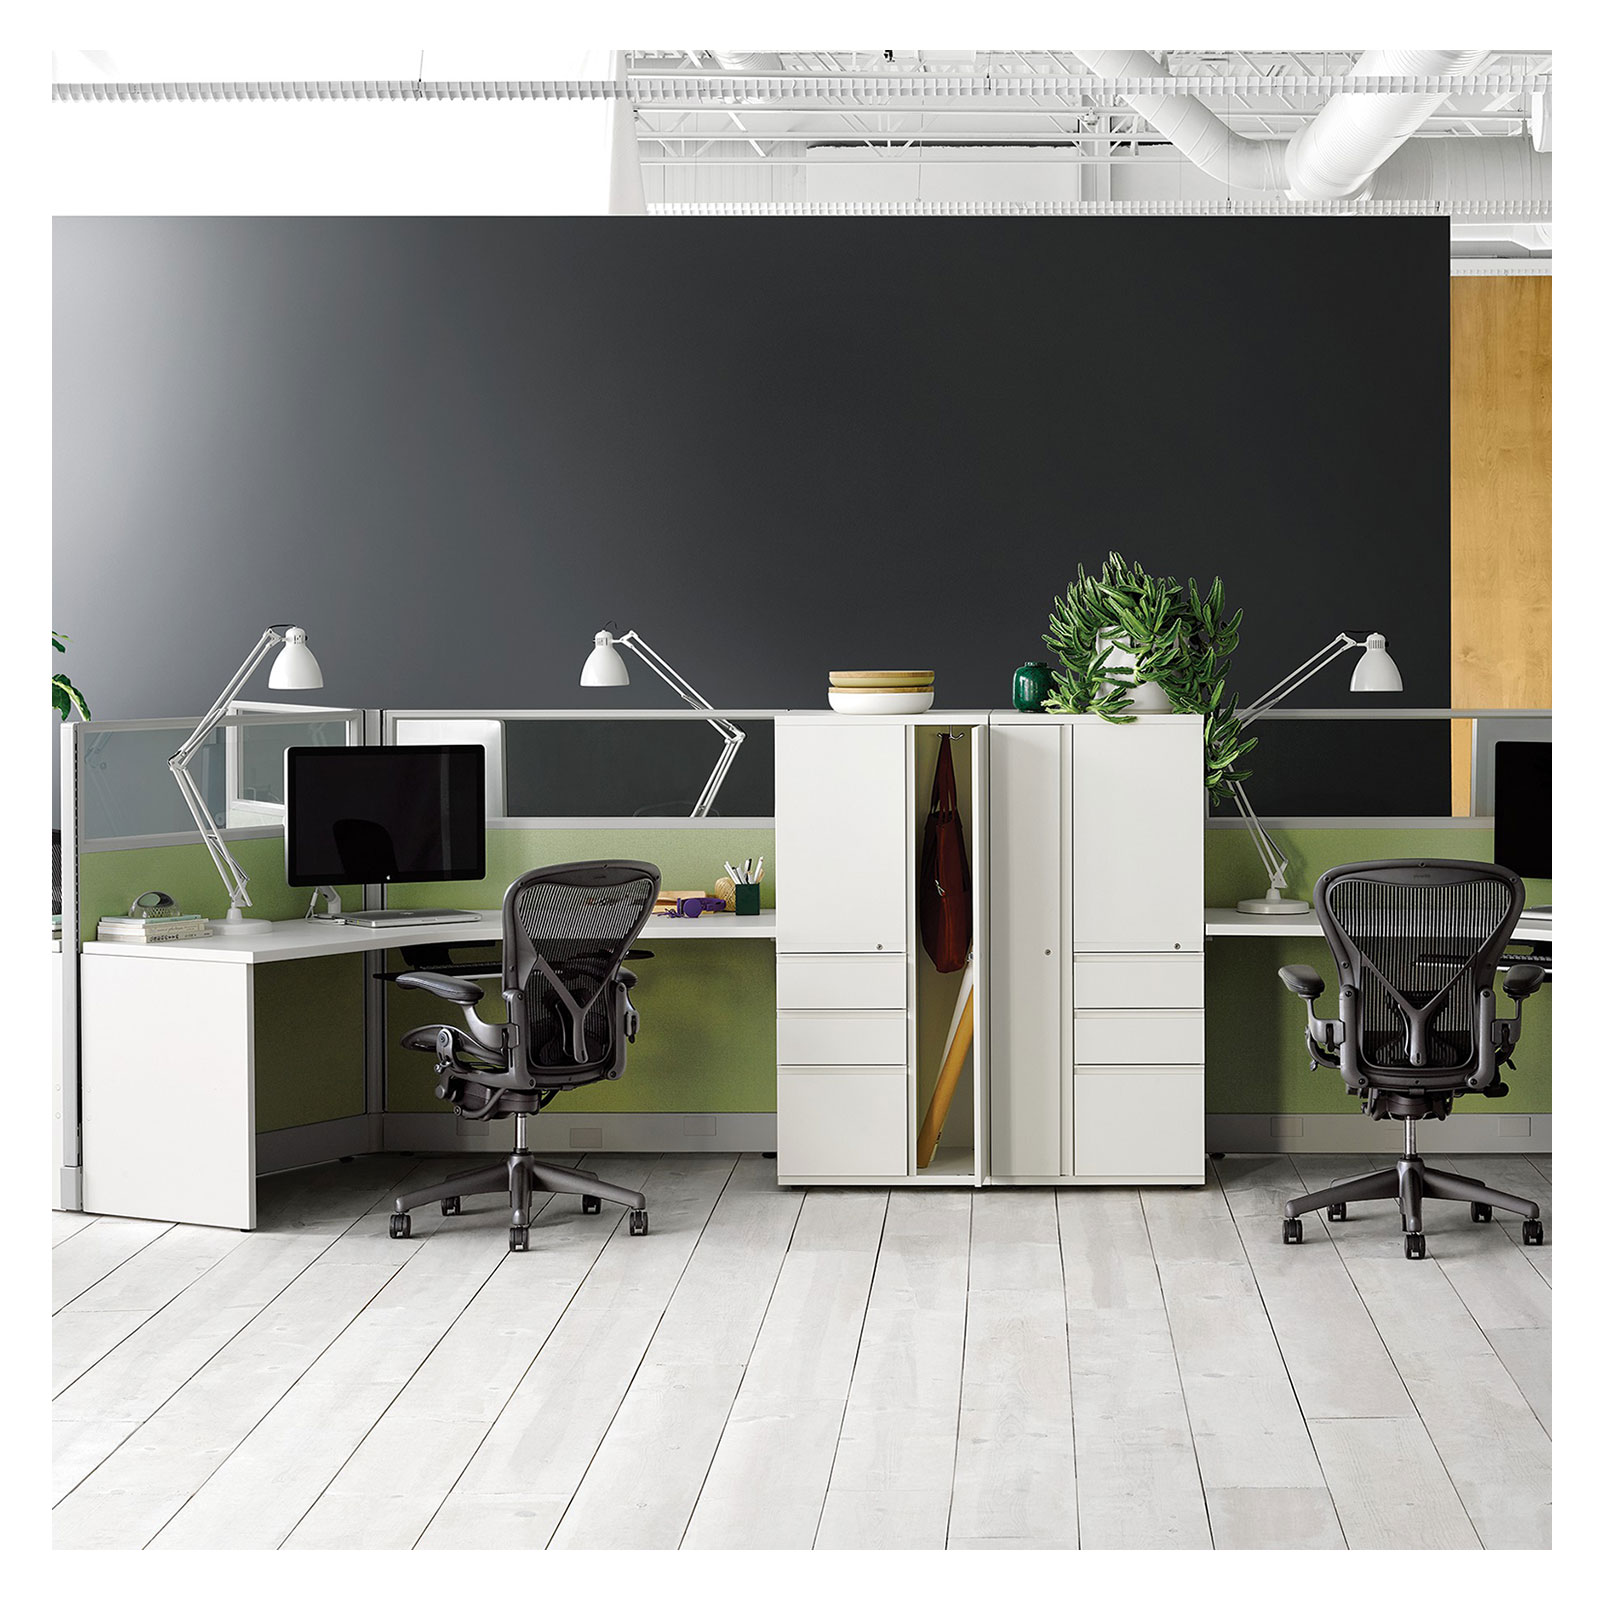 Elevate your workspace with a refurbished Herman Miller workstation, crafted for excellence.